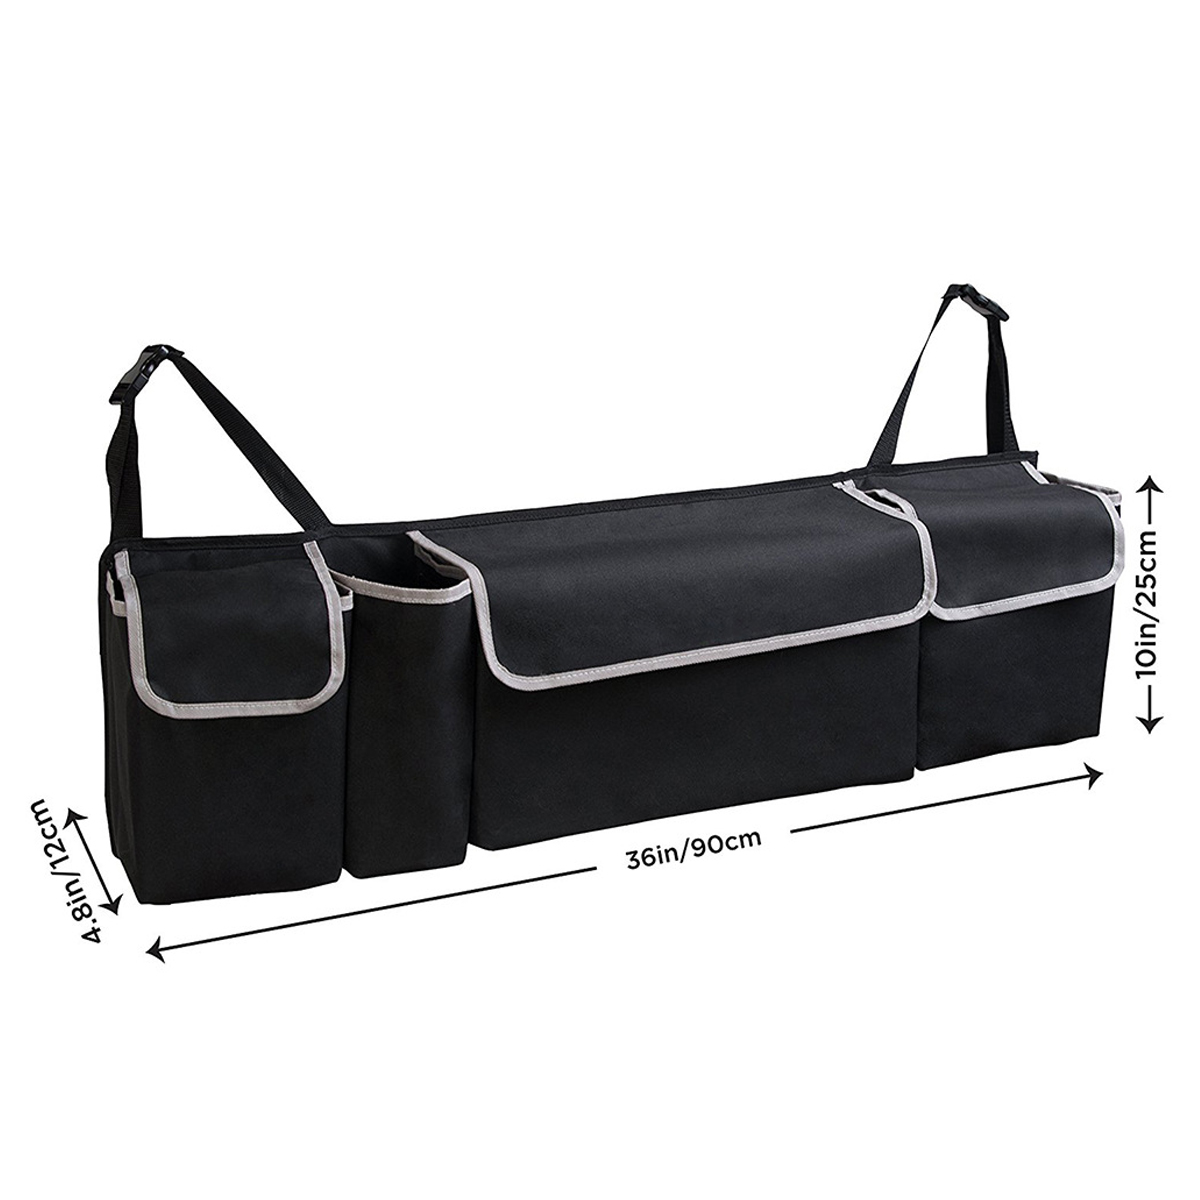 Outdoor-Travel-Car-Seat-Back-Storage-Bag-Hanging-Pack-Pouch-Rear-Trunk-Organizer-1434516-2